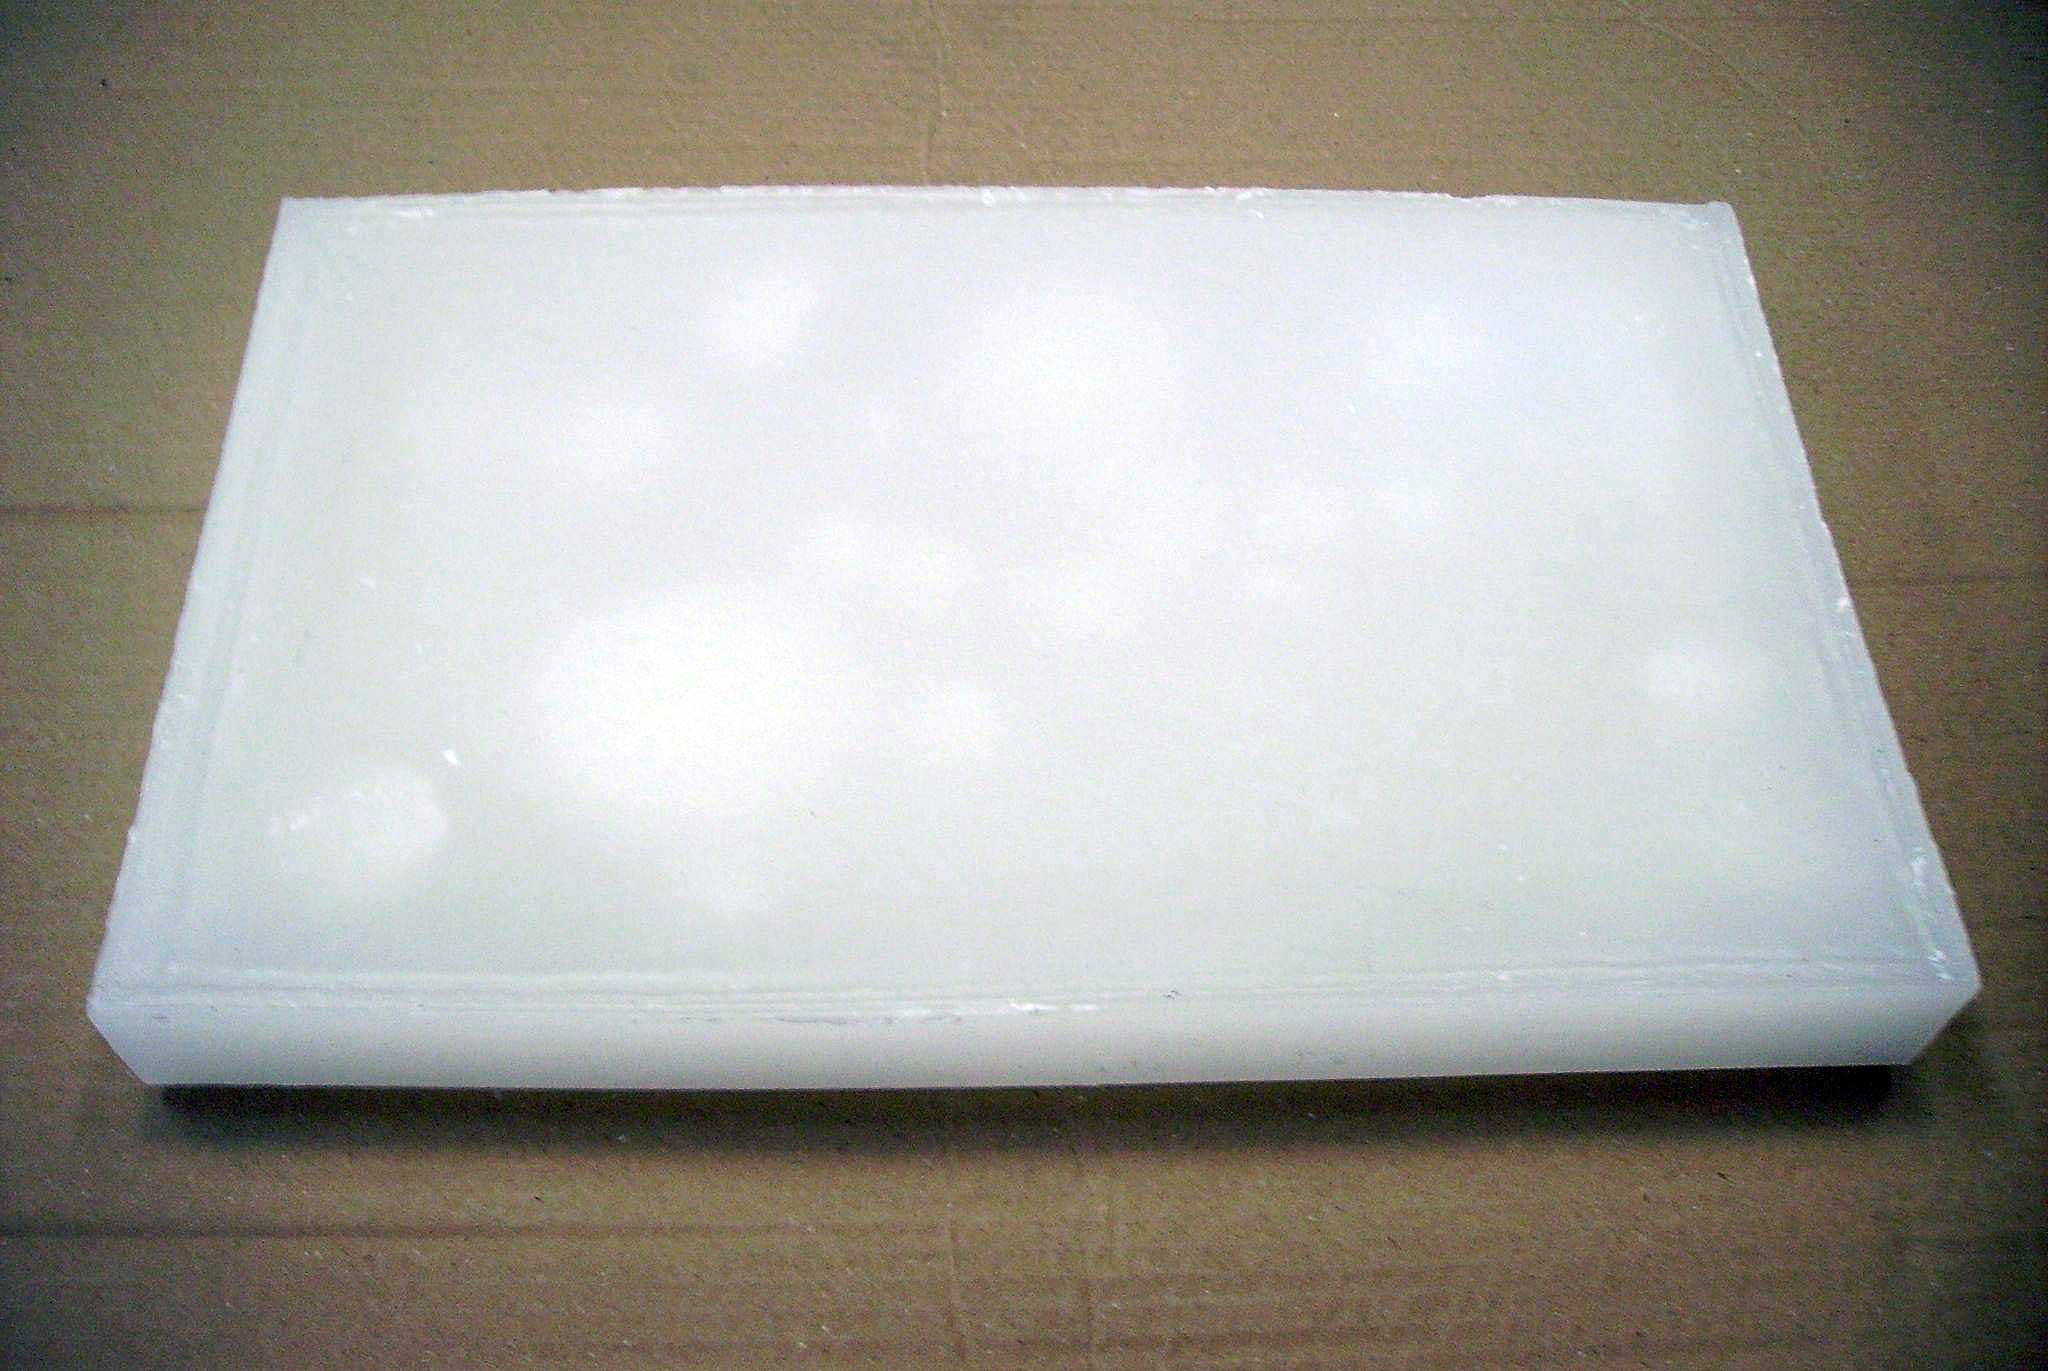 Block of solid paraffin wax